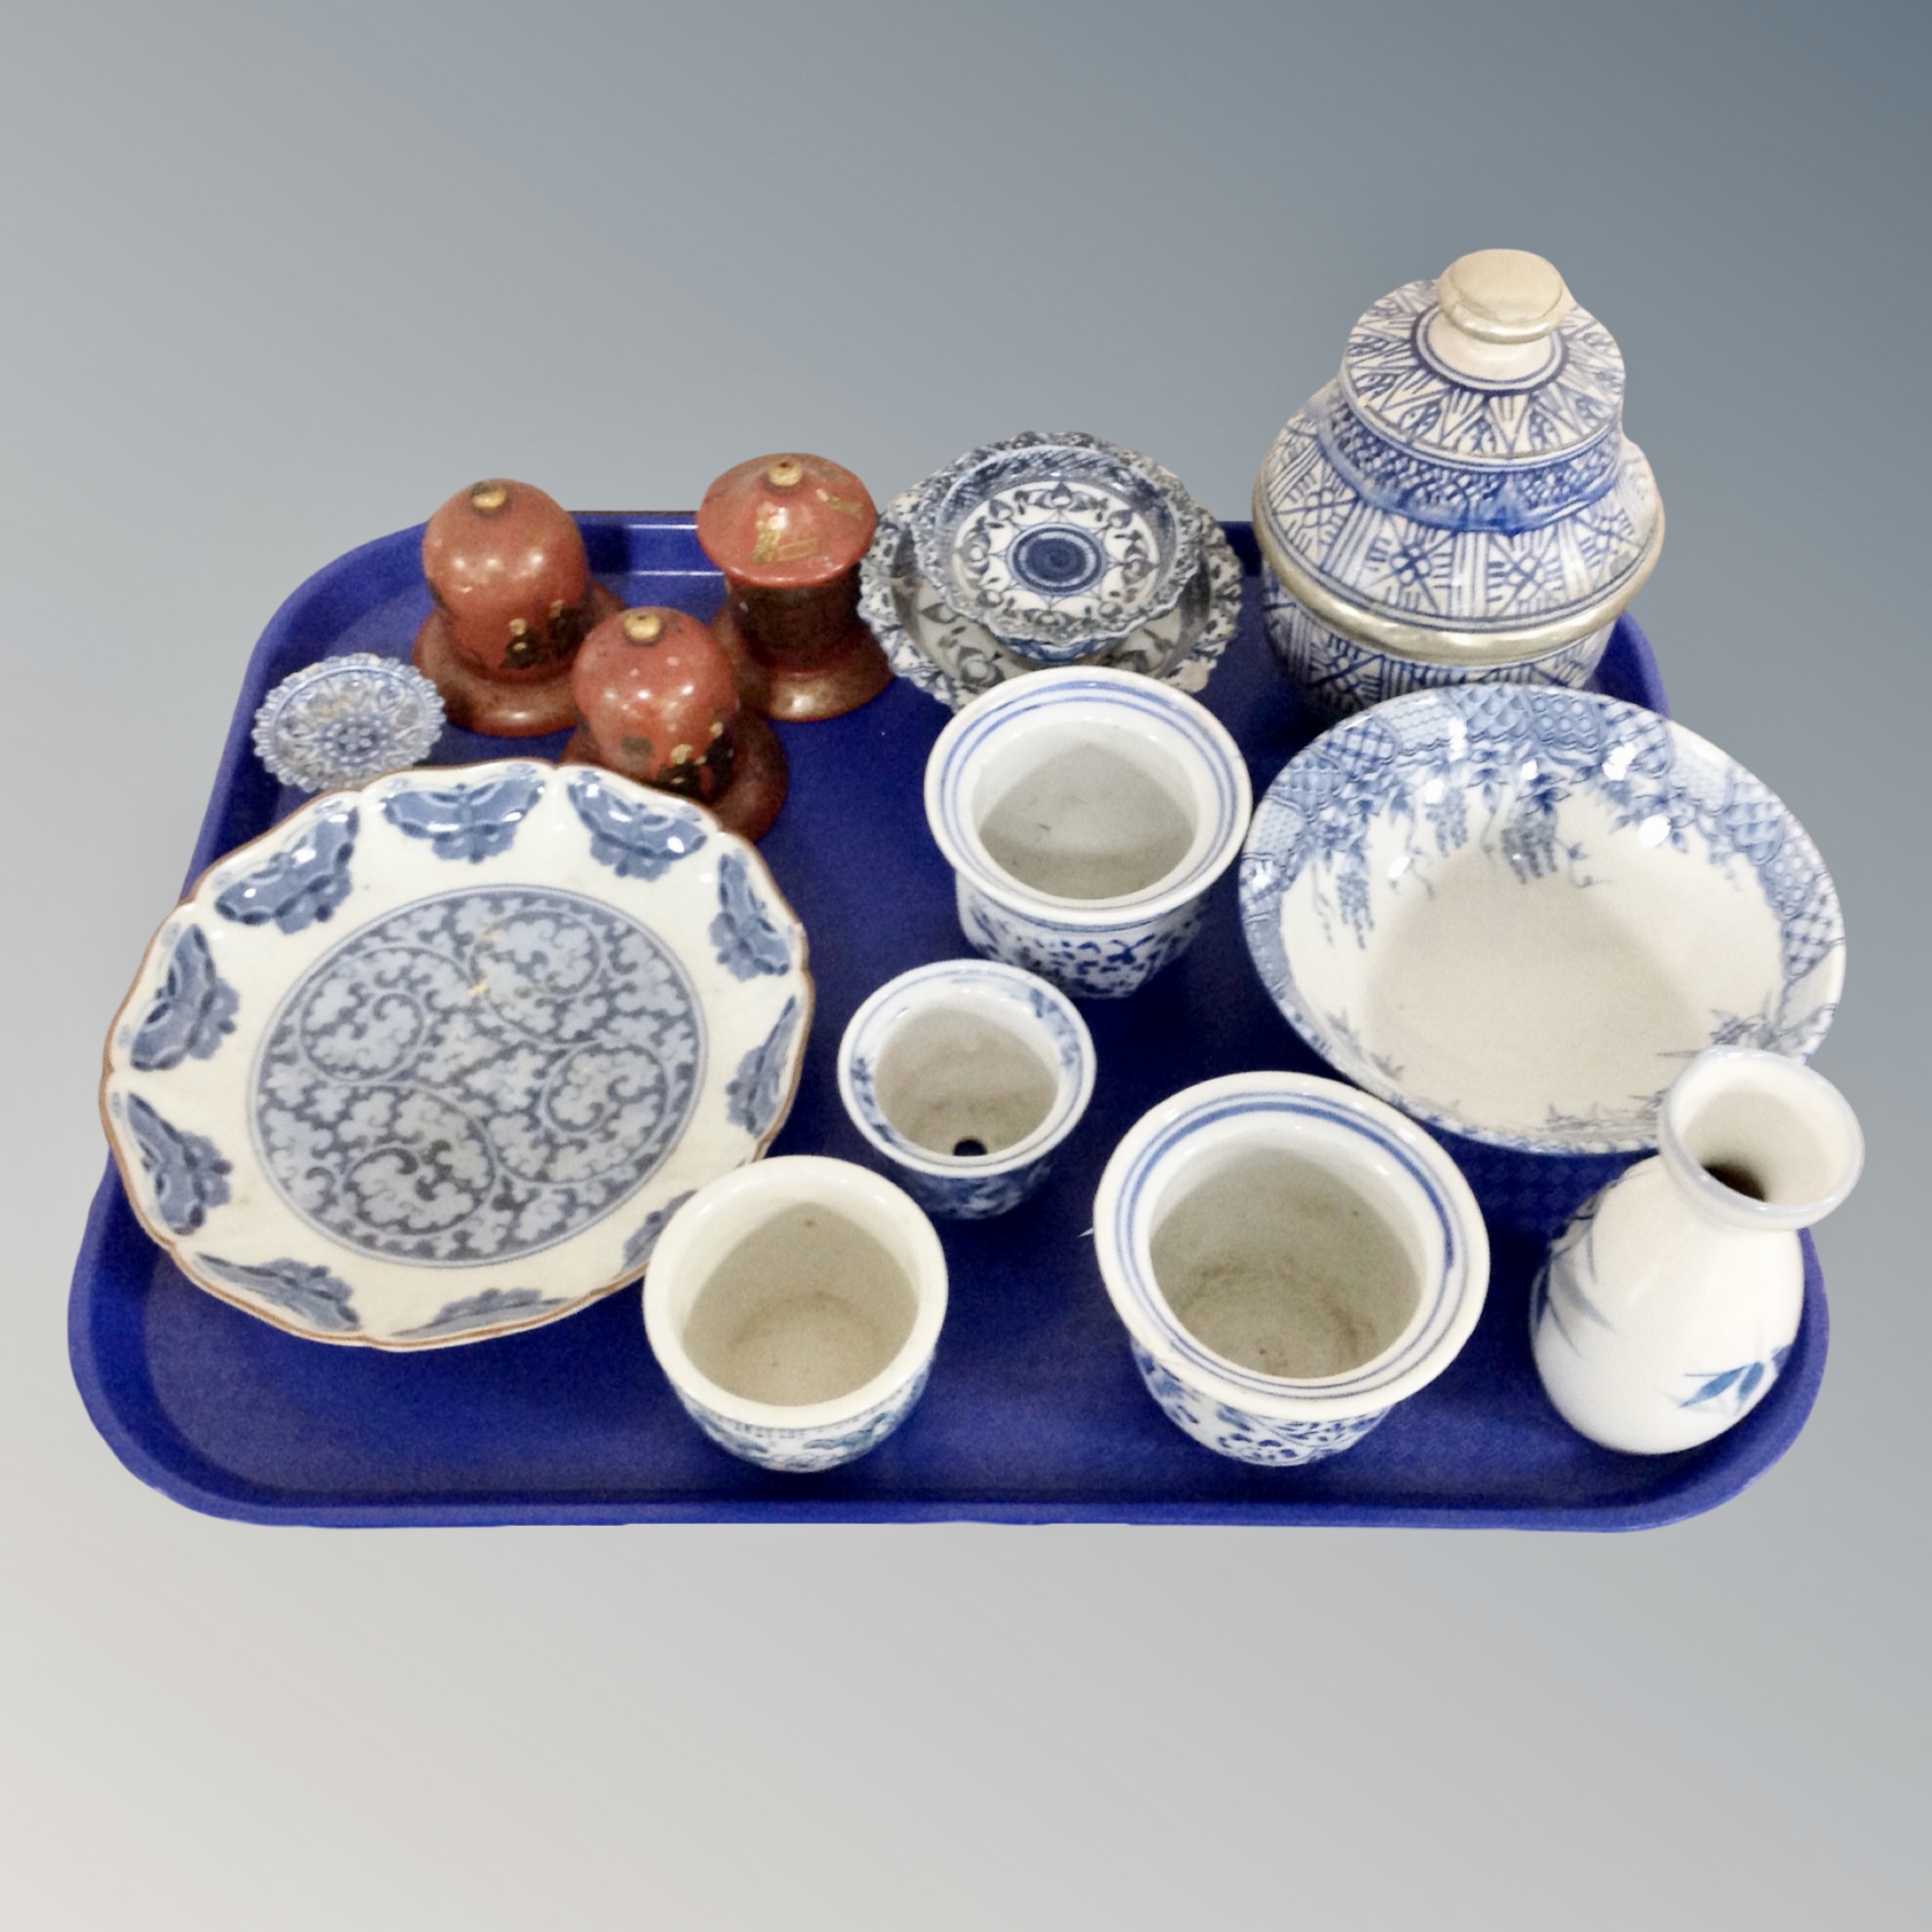 A tray of Chinese blue and white porcelain bowls and vases, set of three red lacquer lidded pots.